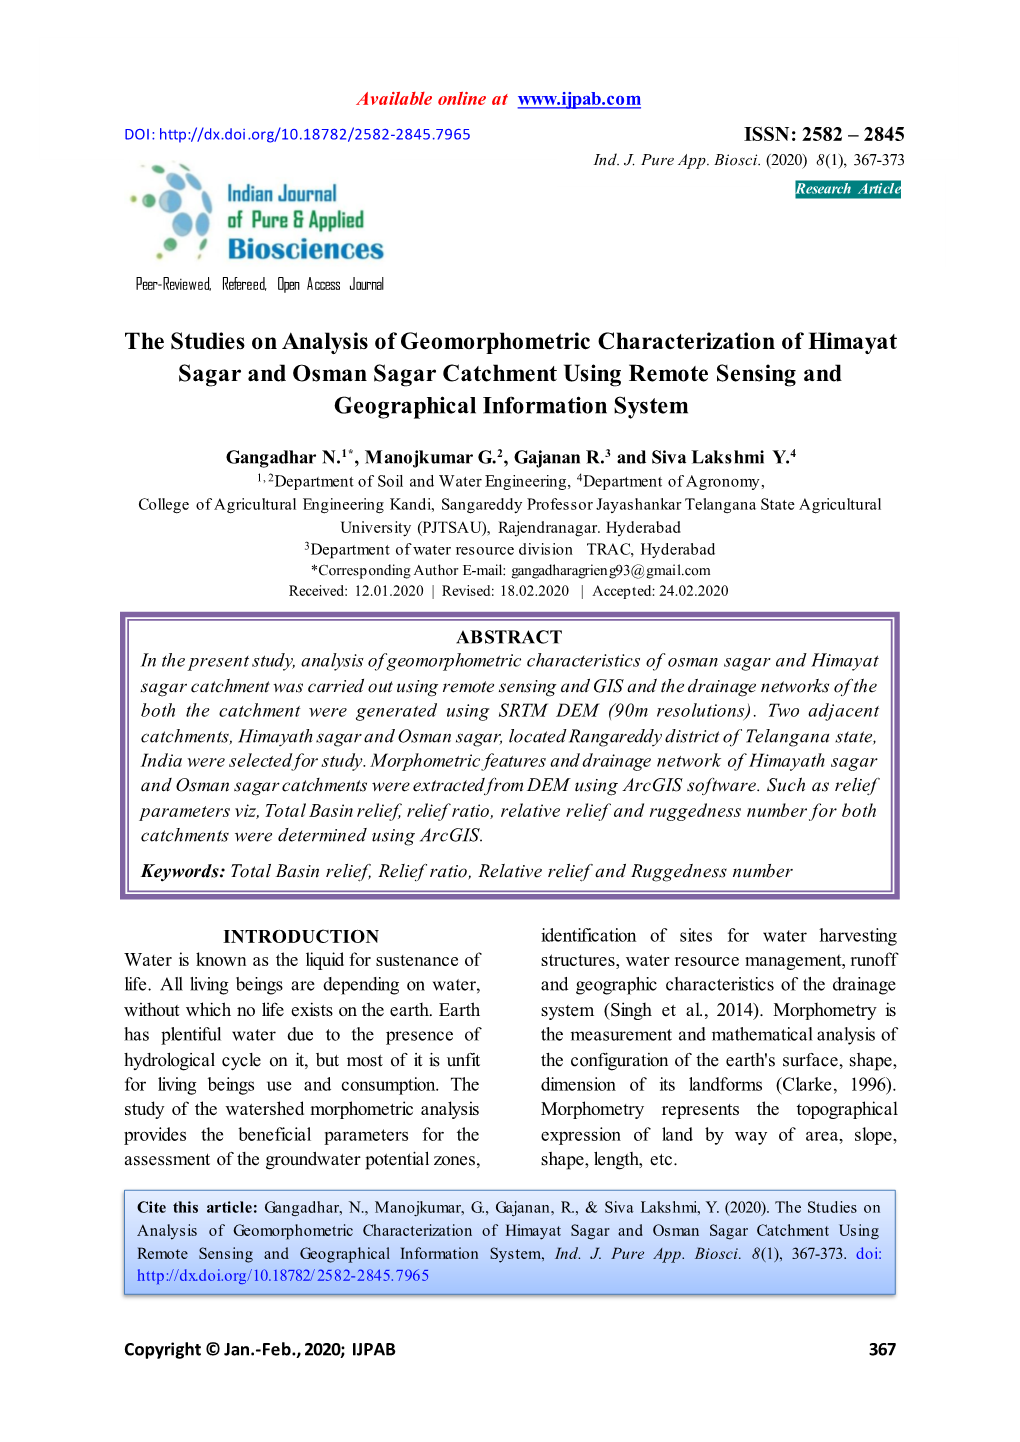 The Studies on Analysis of Geomorphometric Characterization of Himayat Sagar and Osman Sagar Catchment Using Remote Sensing and Geographical Information System